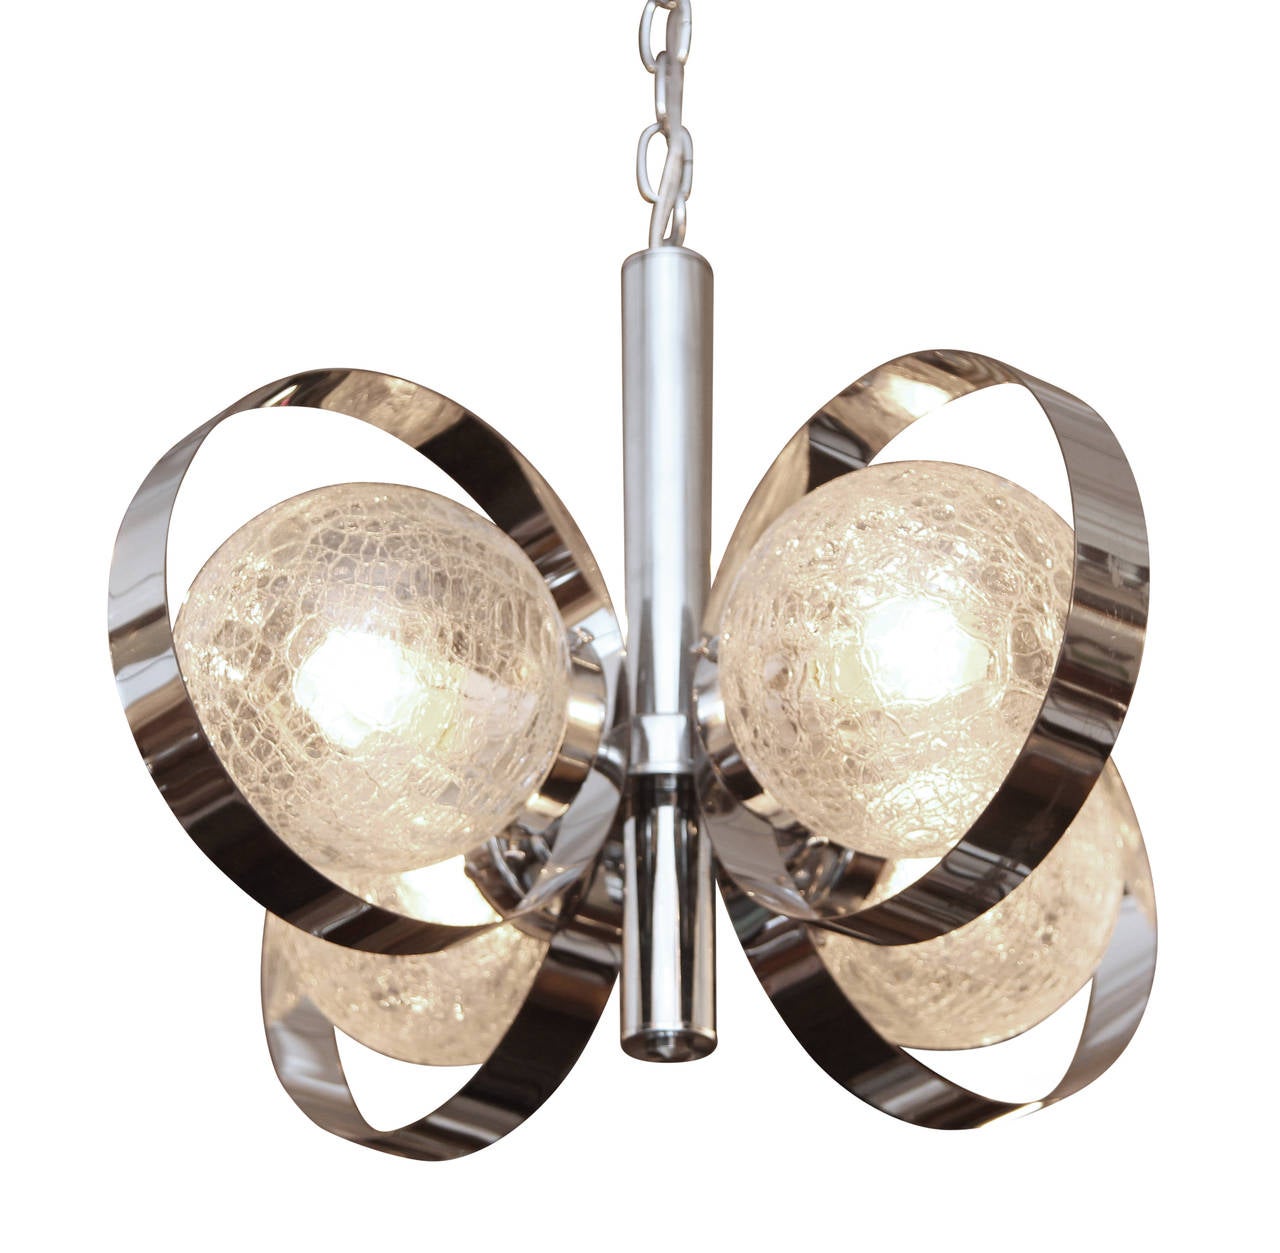 Nickel-plated pendant fixture with crackled glass shades. Italian made in the 1960s. Small quantity available at time of posting. Please inquire. Priced each. This can be seen at our 2420 Broadway location on the upper west side in Manhattan.